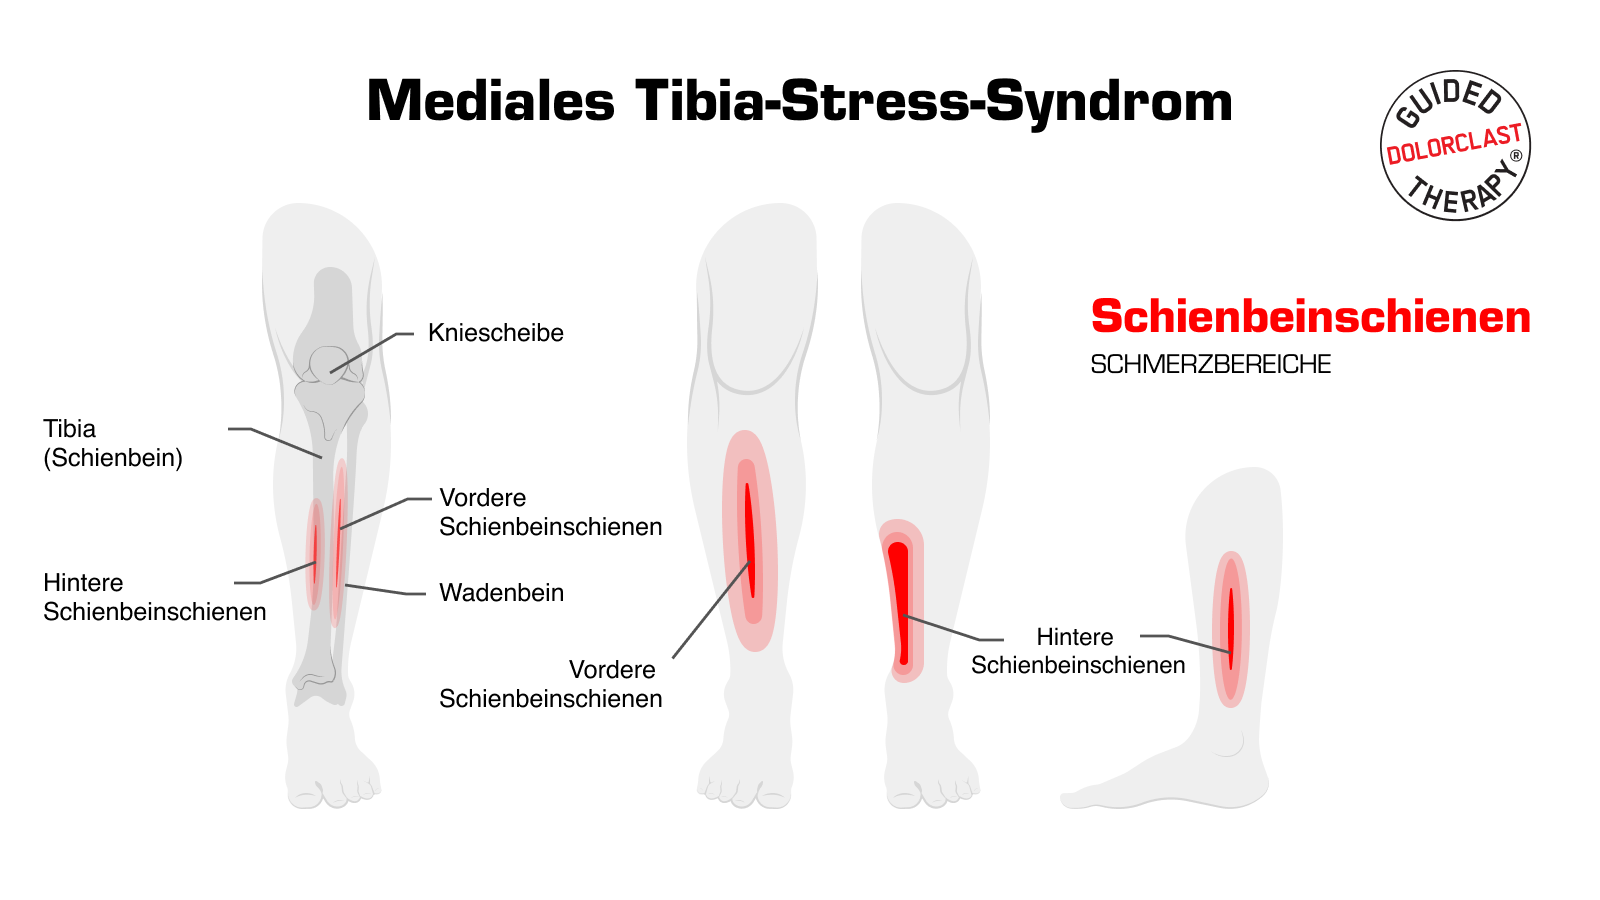 Mediales tibia-stress-syndrom